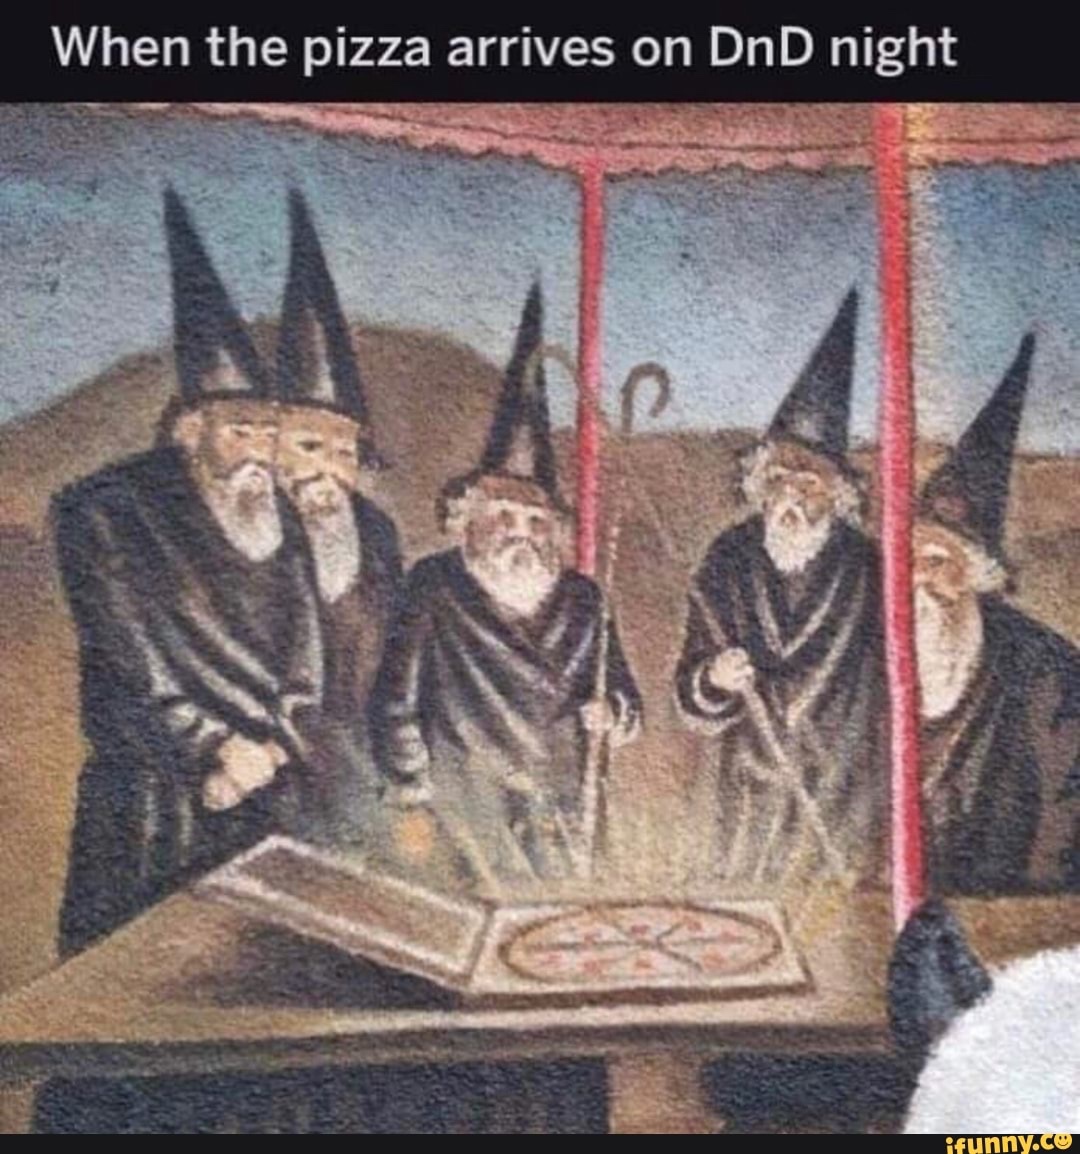 D&D meme - dnd pizza meme - When the pizza arrives on DnD night ifunny.co